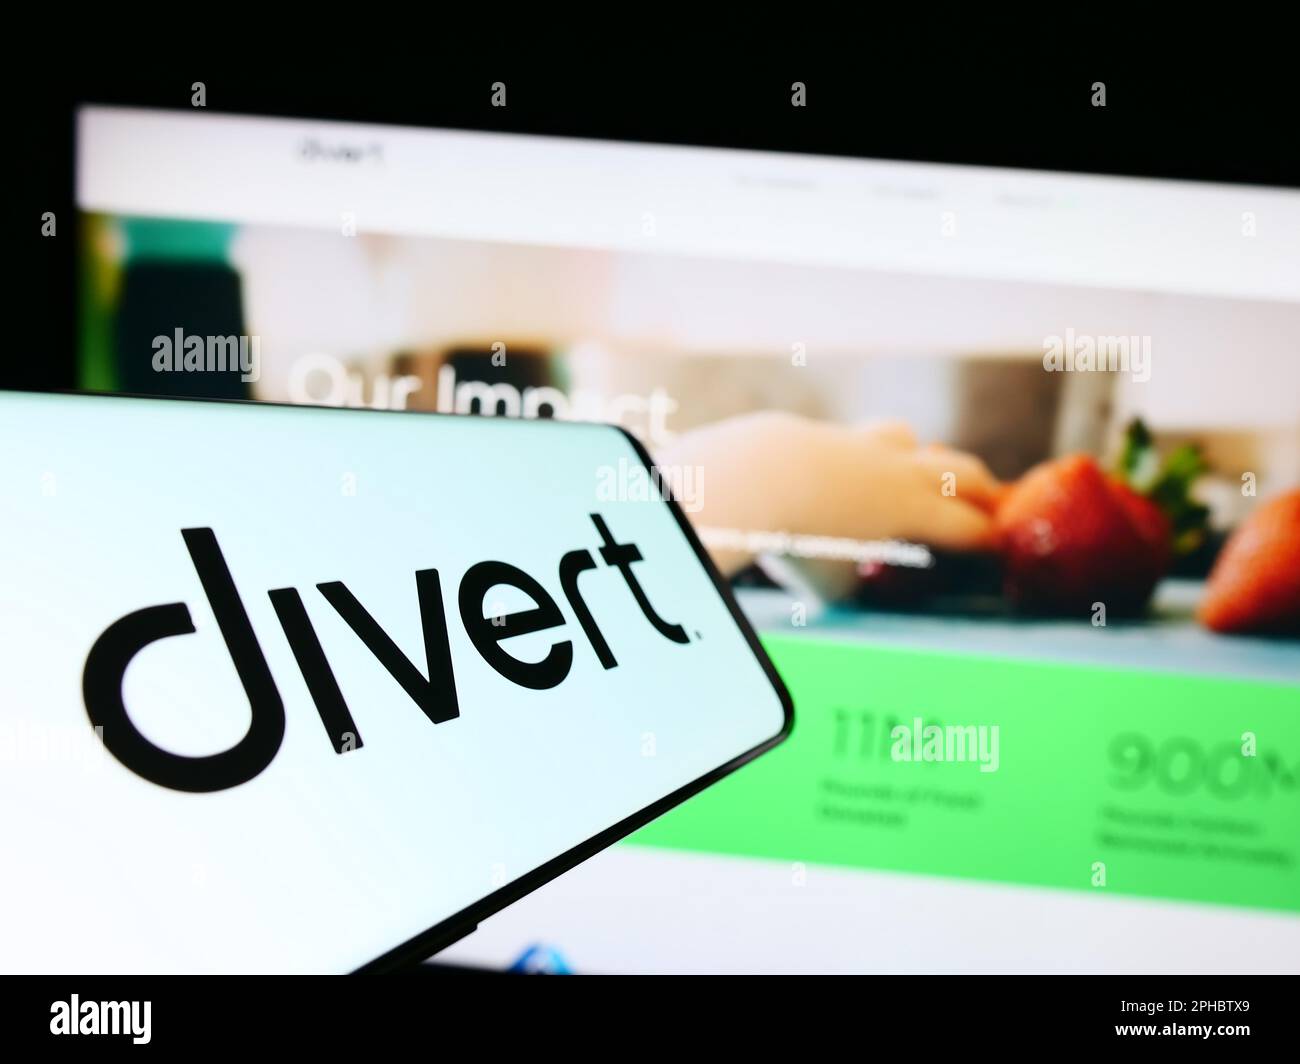 Smartphone with logo of American food technology company Divert Inc. on screen in front of business website. Focus on center of phone display. Stock Photo